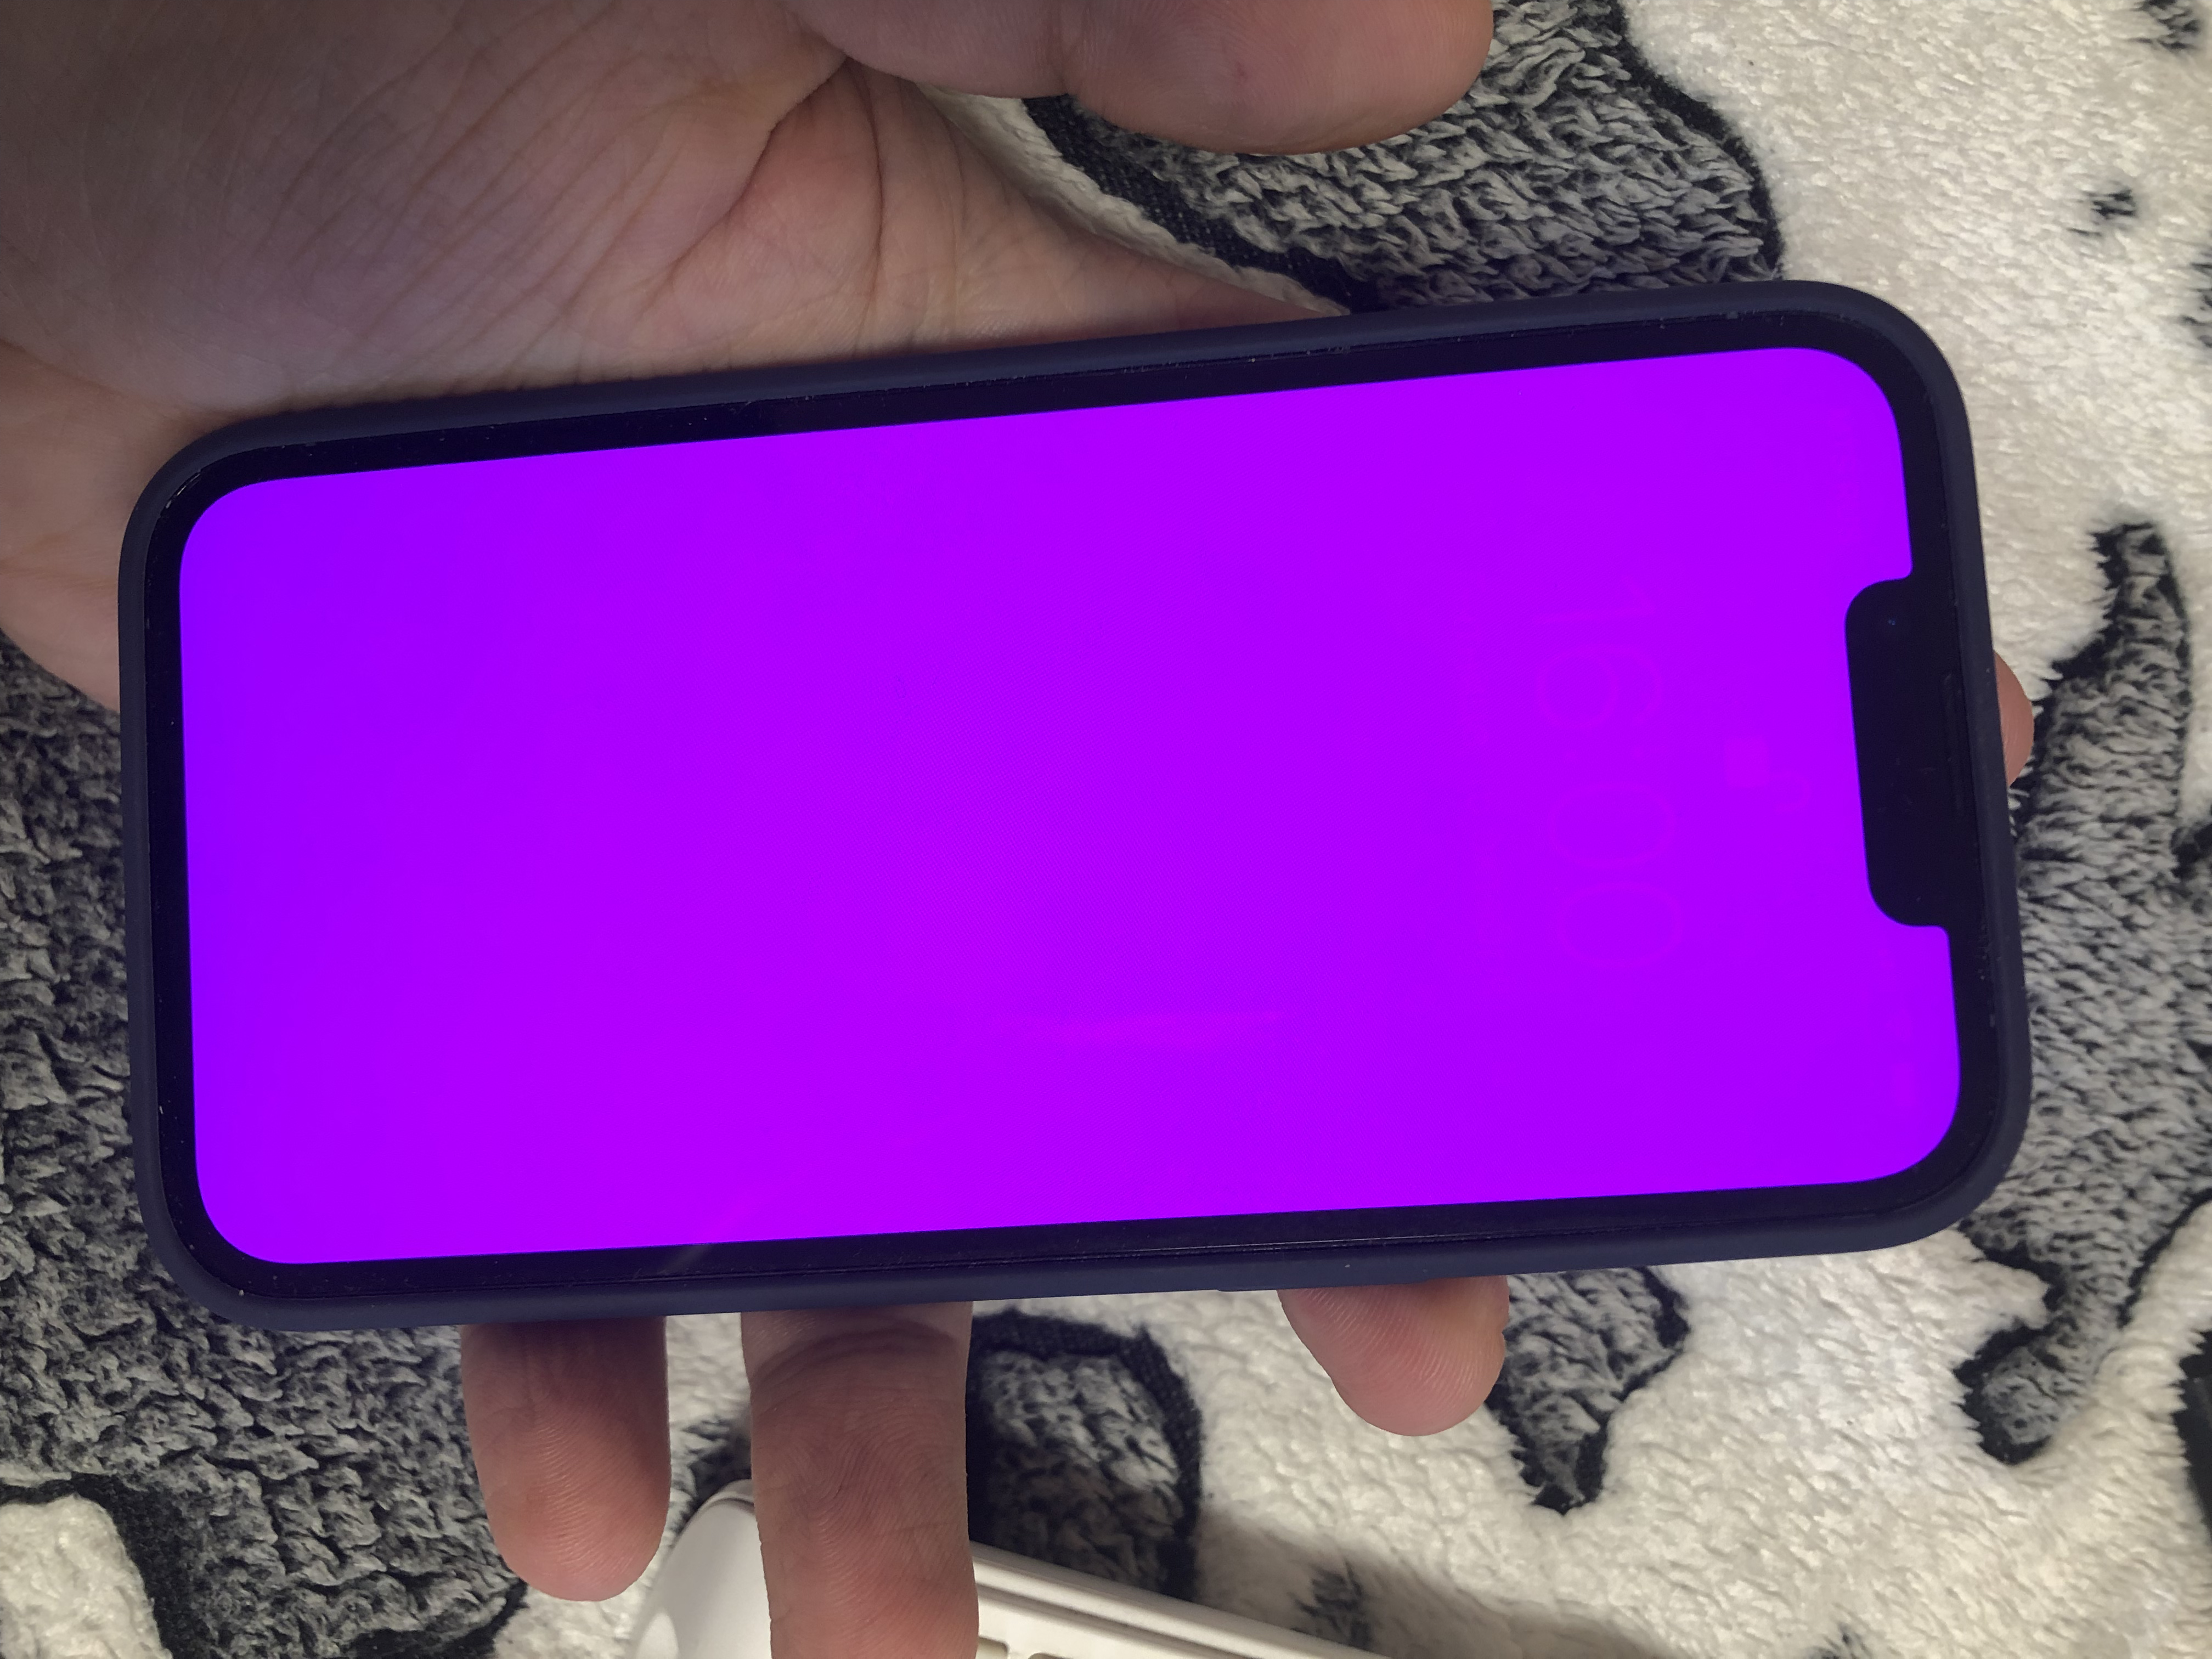 Apple iPhone 13 owners complain about pink displays and crashes thumbnail